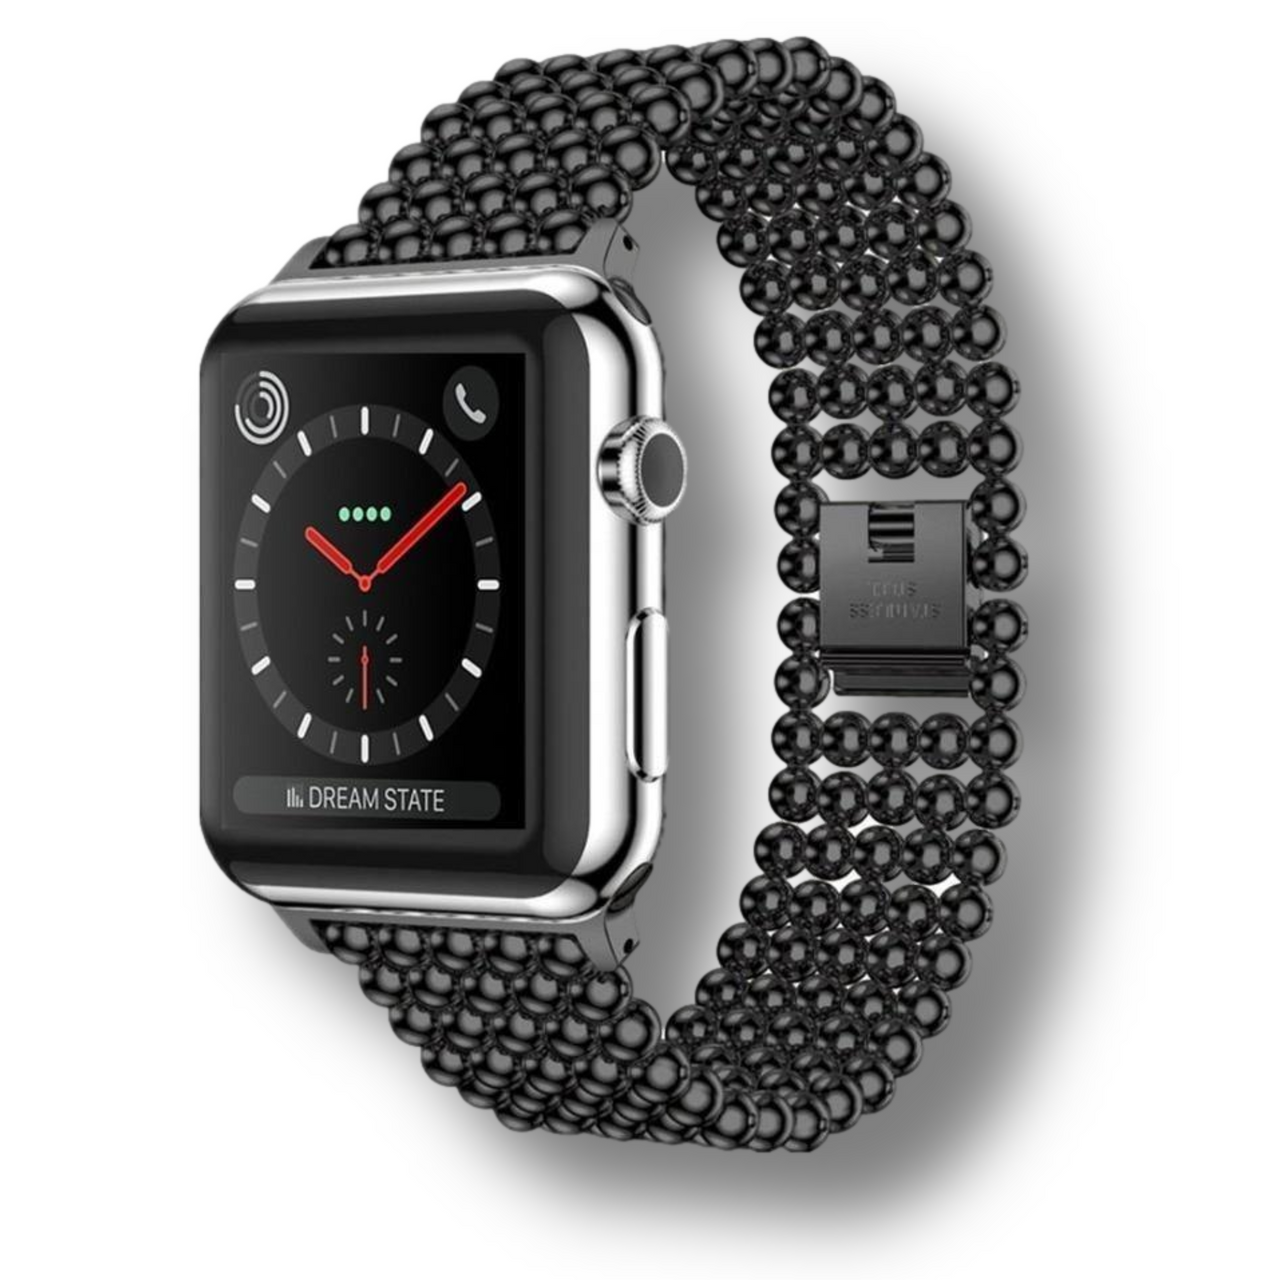 Wrist Link Strap for Apple Watch - watchband.direct